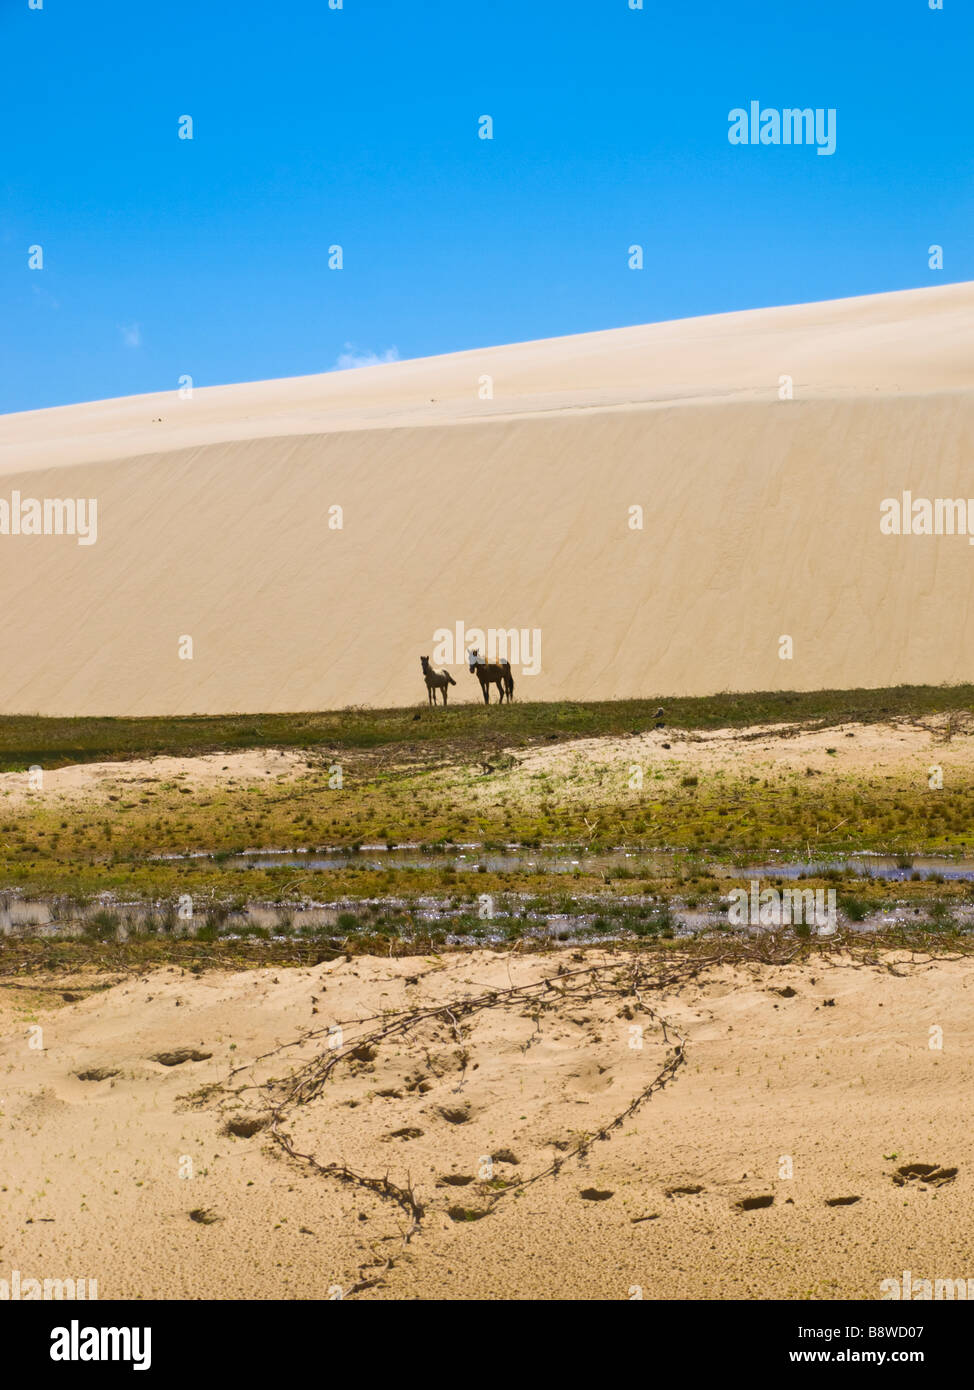 Stray horses in the dunes of a fluvial island in the Parnaiba river Delta das Americas, Piaui state, northeastern Brazil. Stock Photo